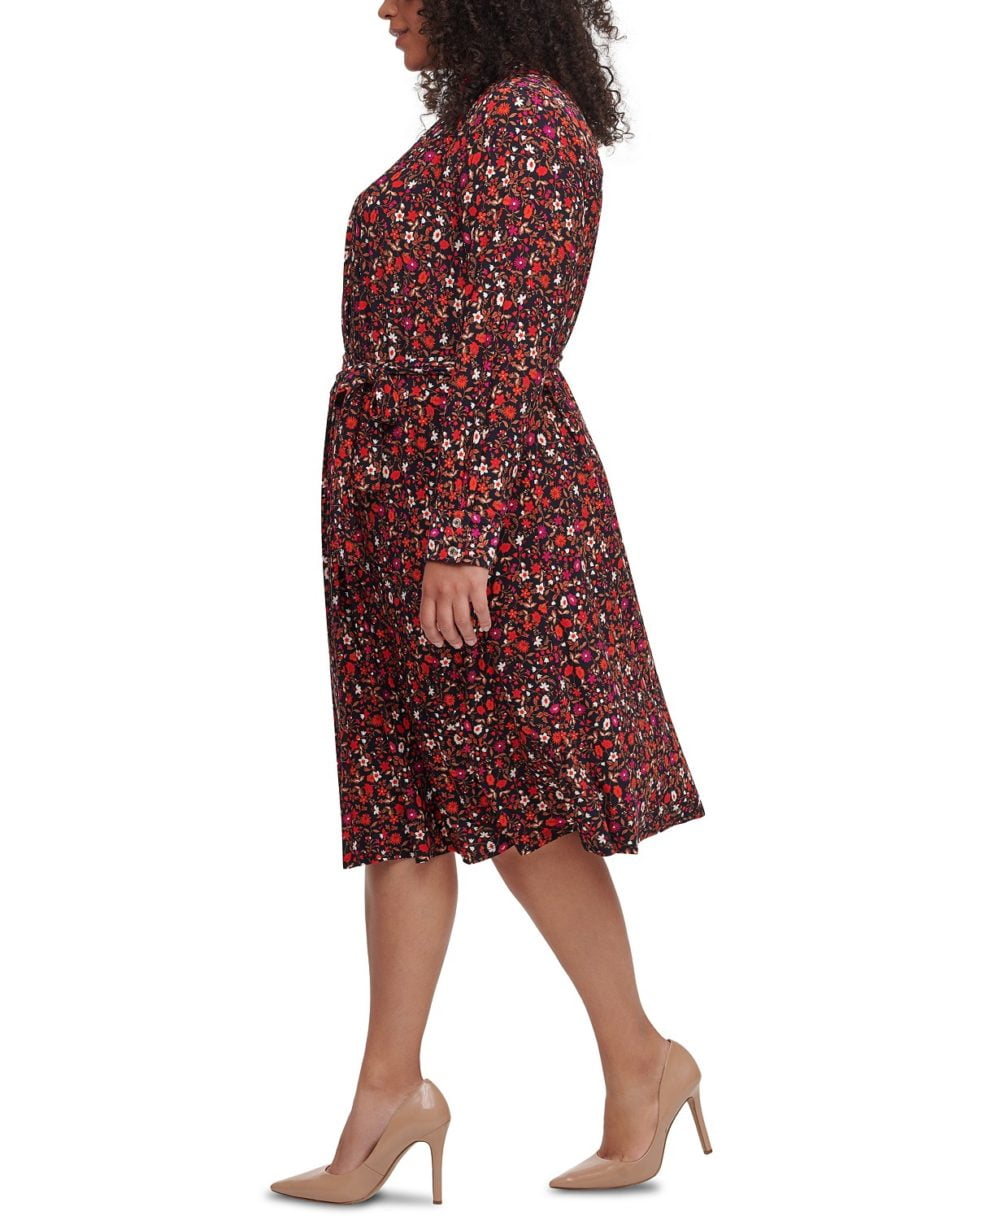 woocommerce-673321-2209615.cloudwaysapps.com-tommy-hilfiger-womens-plus-size-ditsy-floral-print-shirtdress